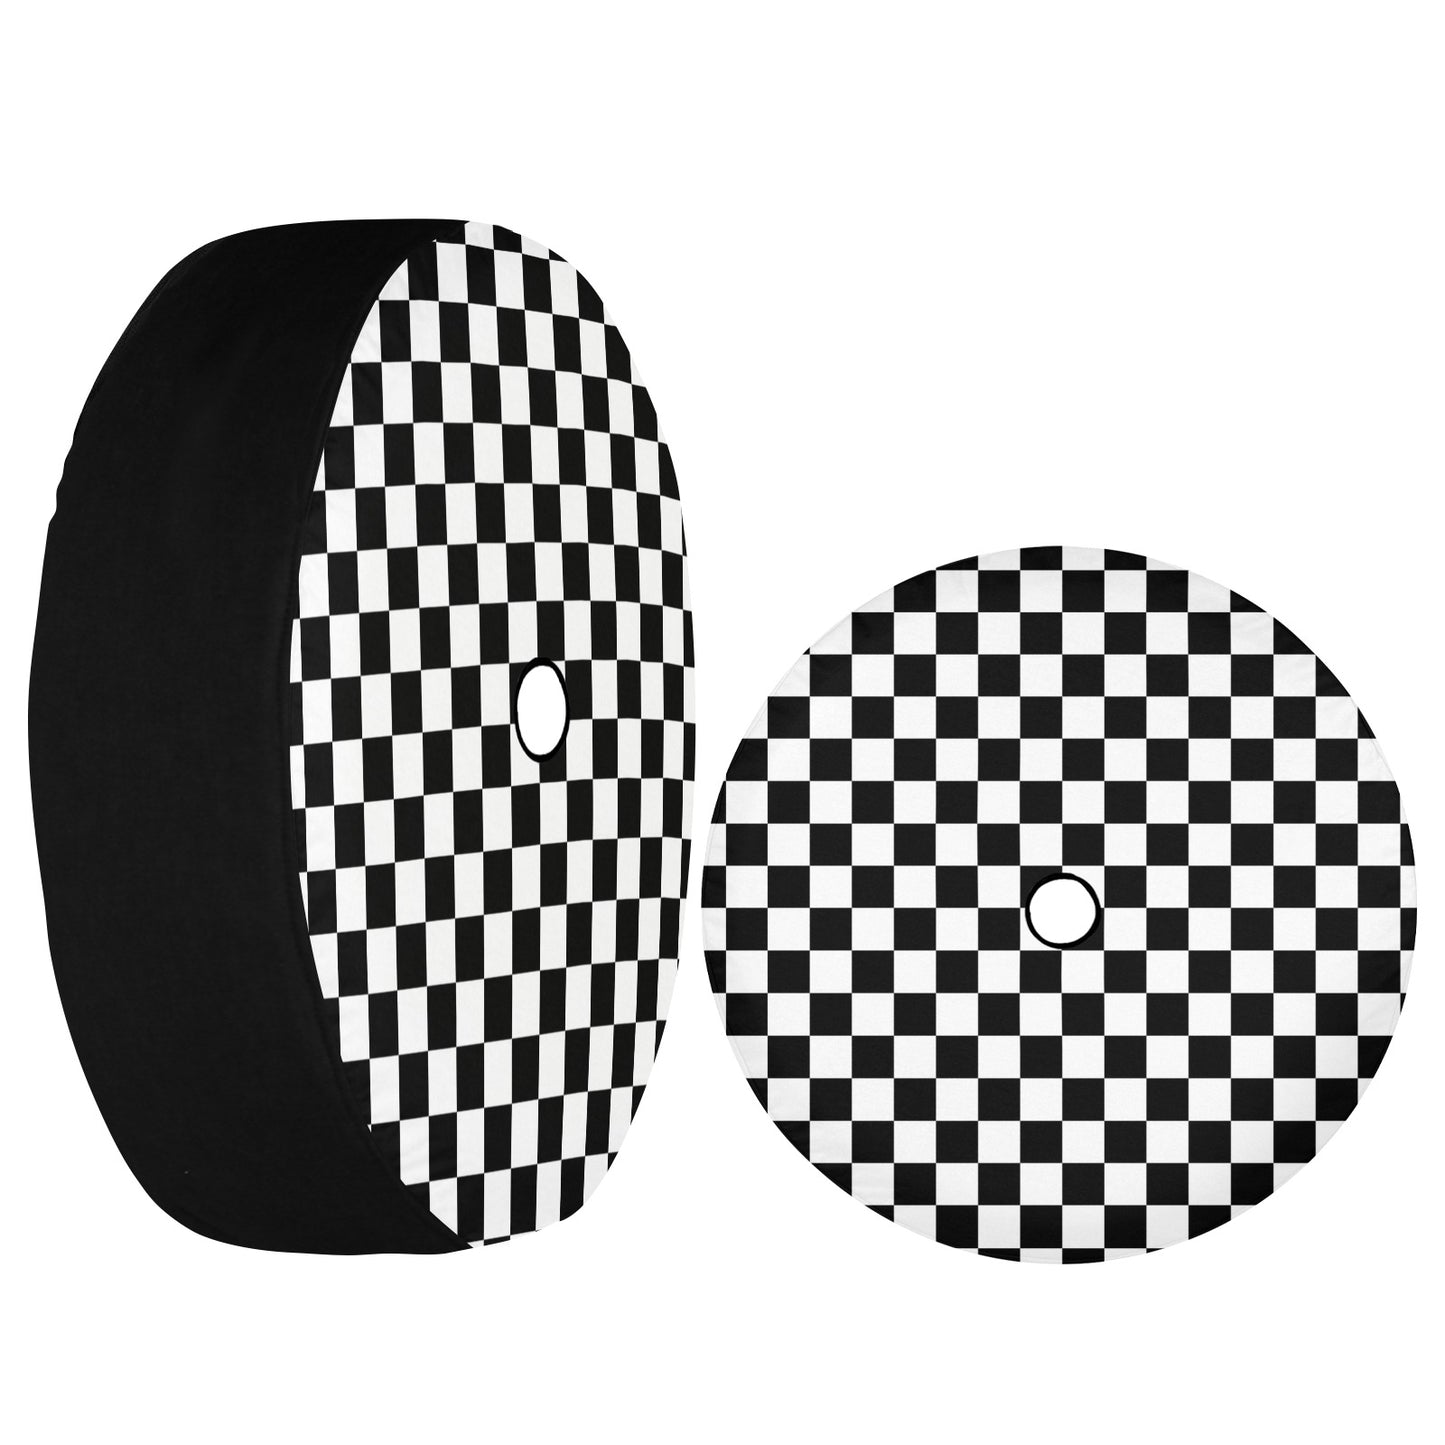 Checkered Spare Tire Cover, Black White Check Extra Rear Wheel Backup Camera Hole Racing Flag Pattern Back Tire Camper Rv Trailer Car Auto